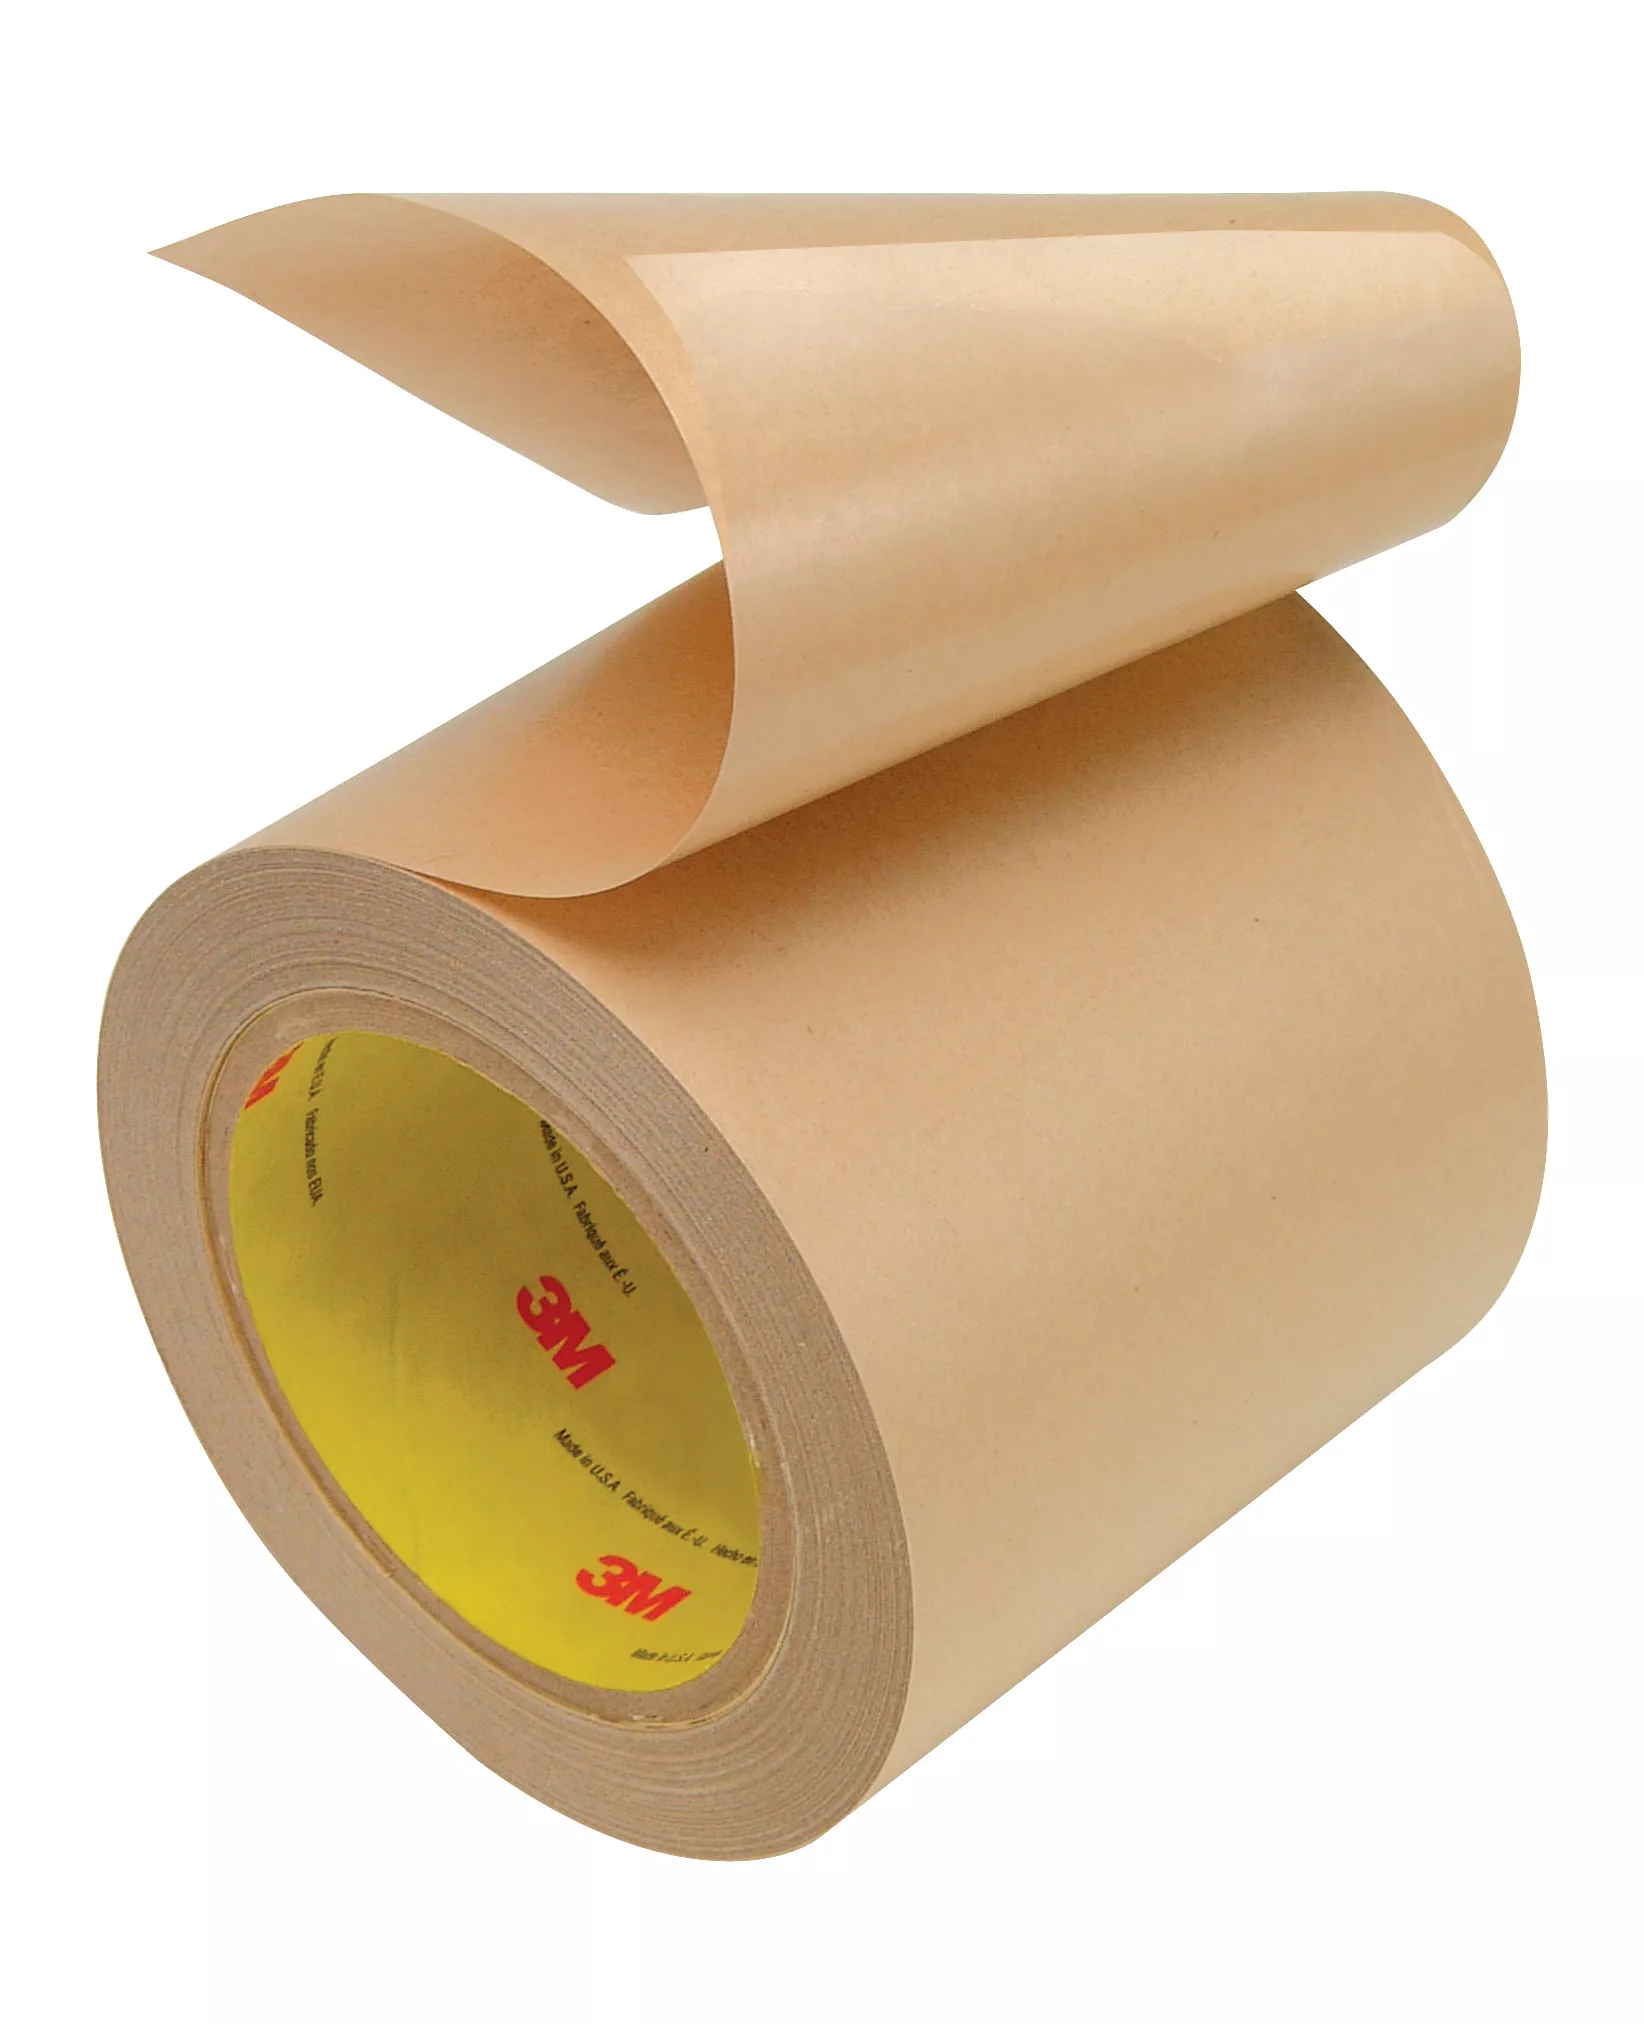 SKU 7100306861 | 3M™ Electrically Conductive Adhesive Transfer Tape 9703